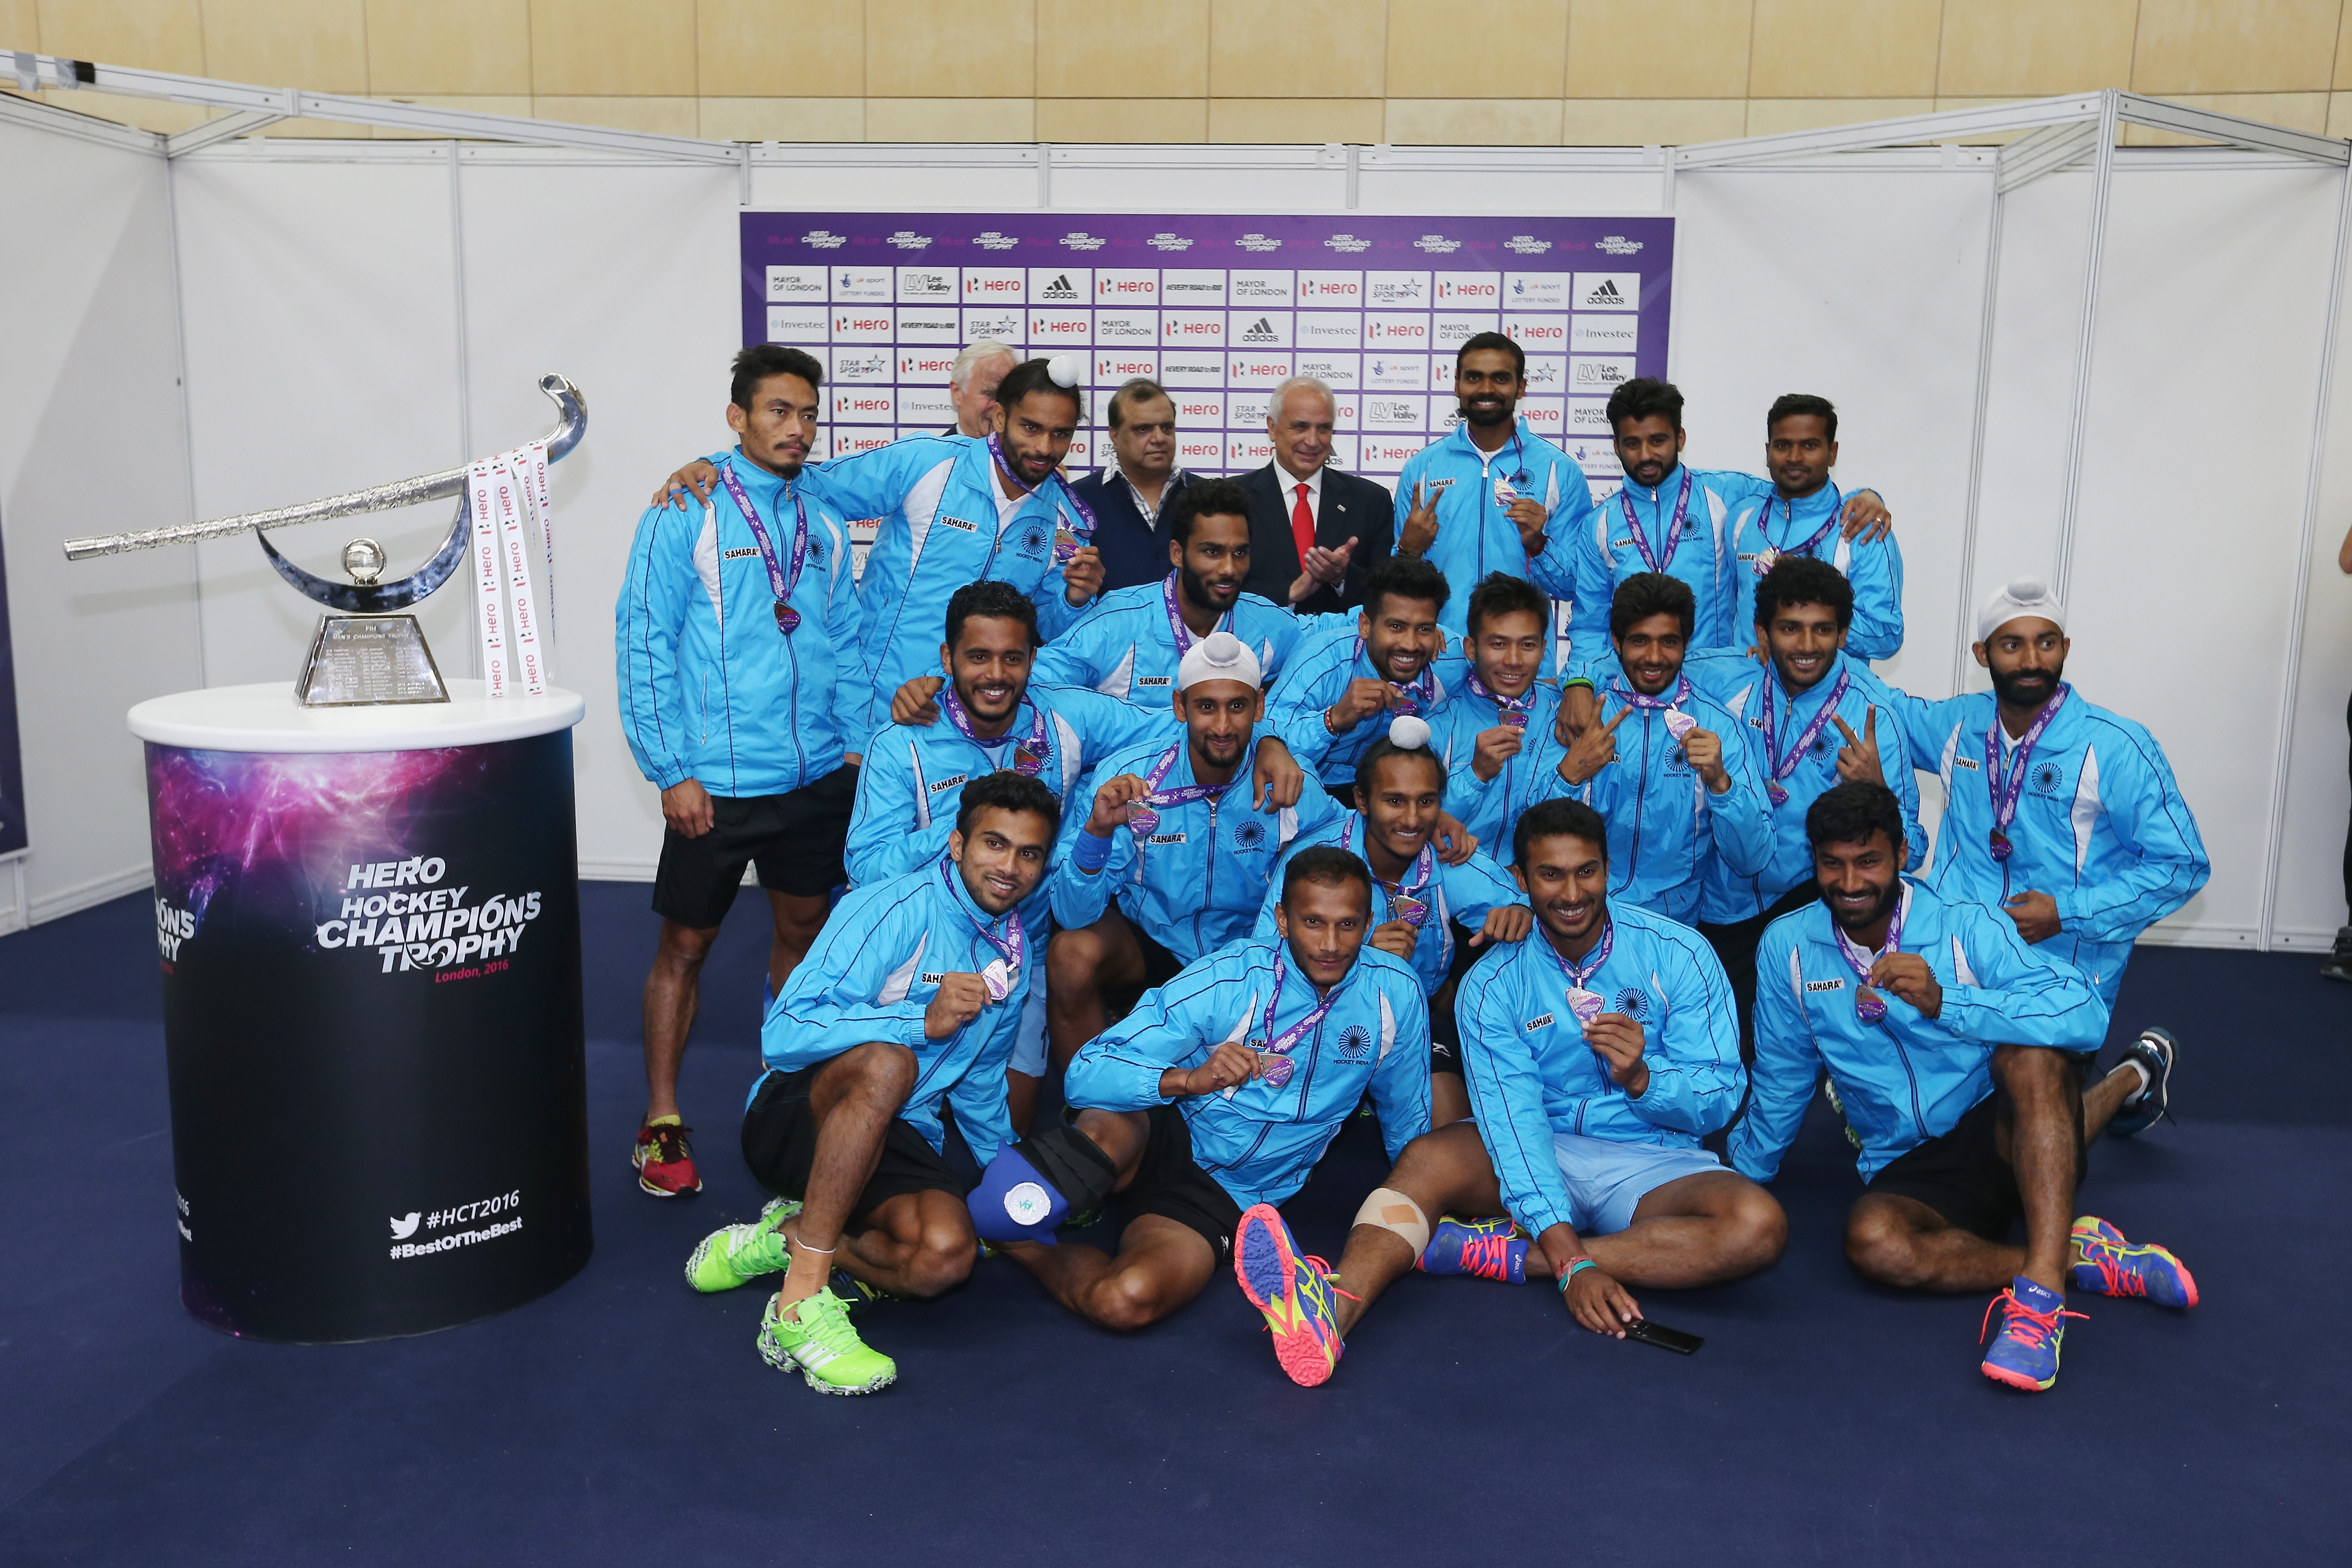 Can the hockey team prove Viren Rasquinha happily wrong at the Olympics?